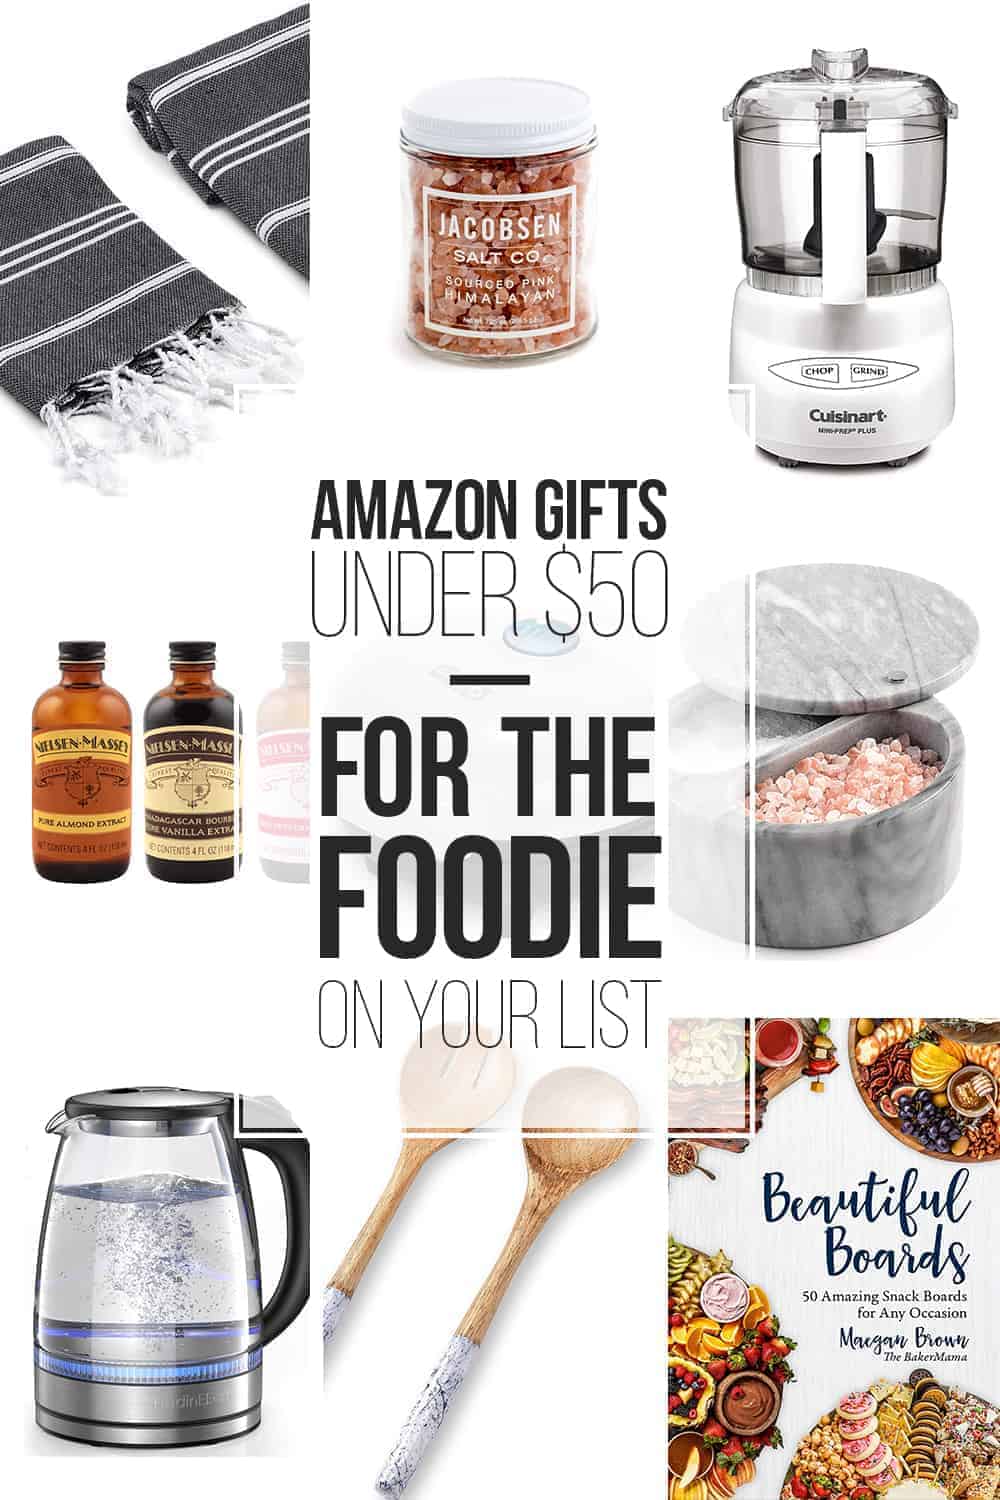 Amazon Gifts Under $50 for the Foodie On Your List  My Baking Addiction